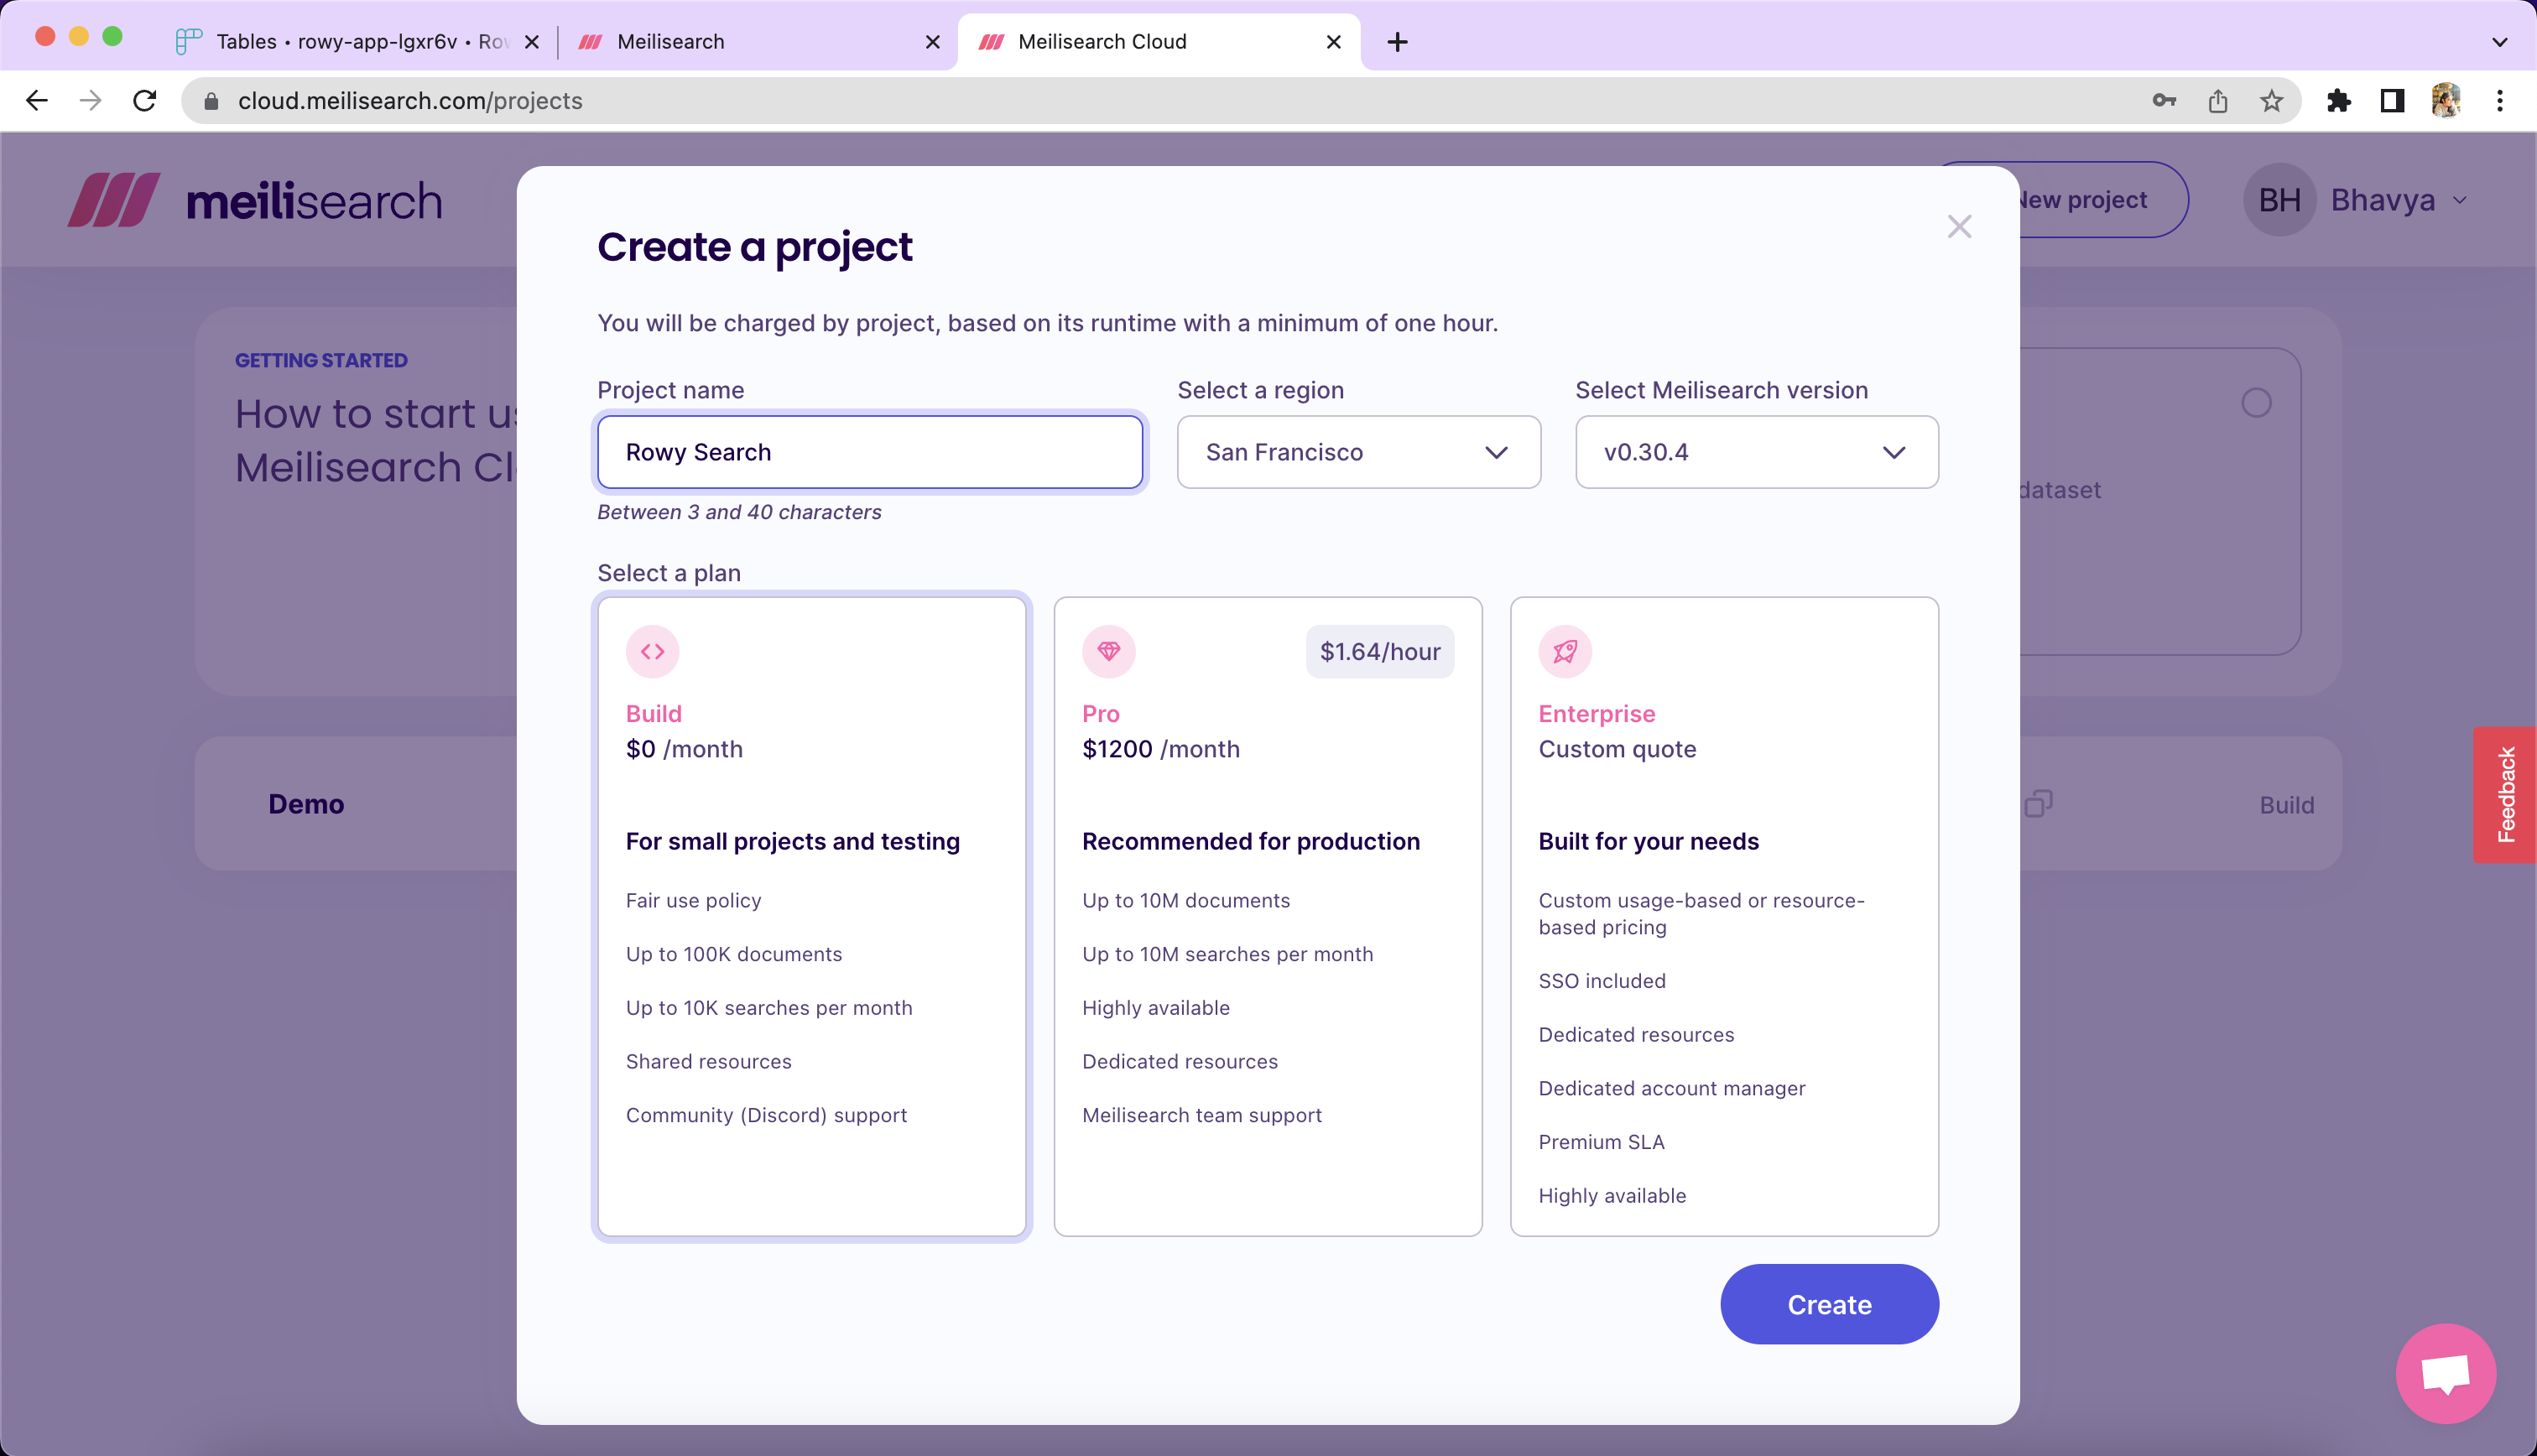 A screenshot showing the create project page.